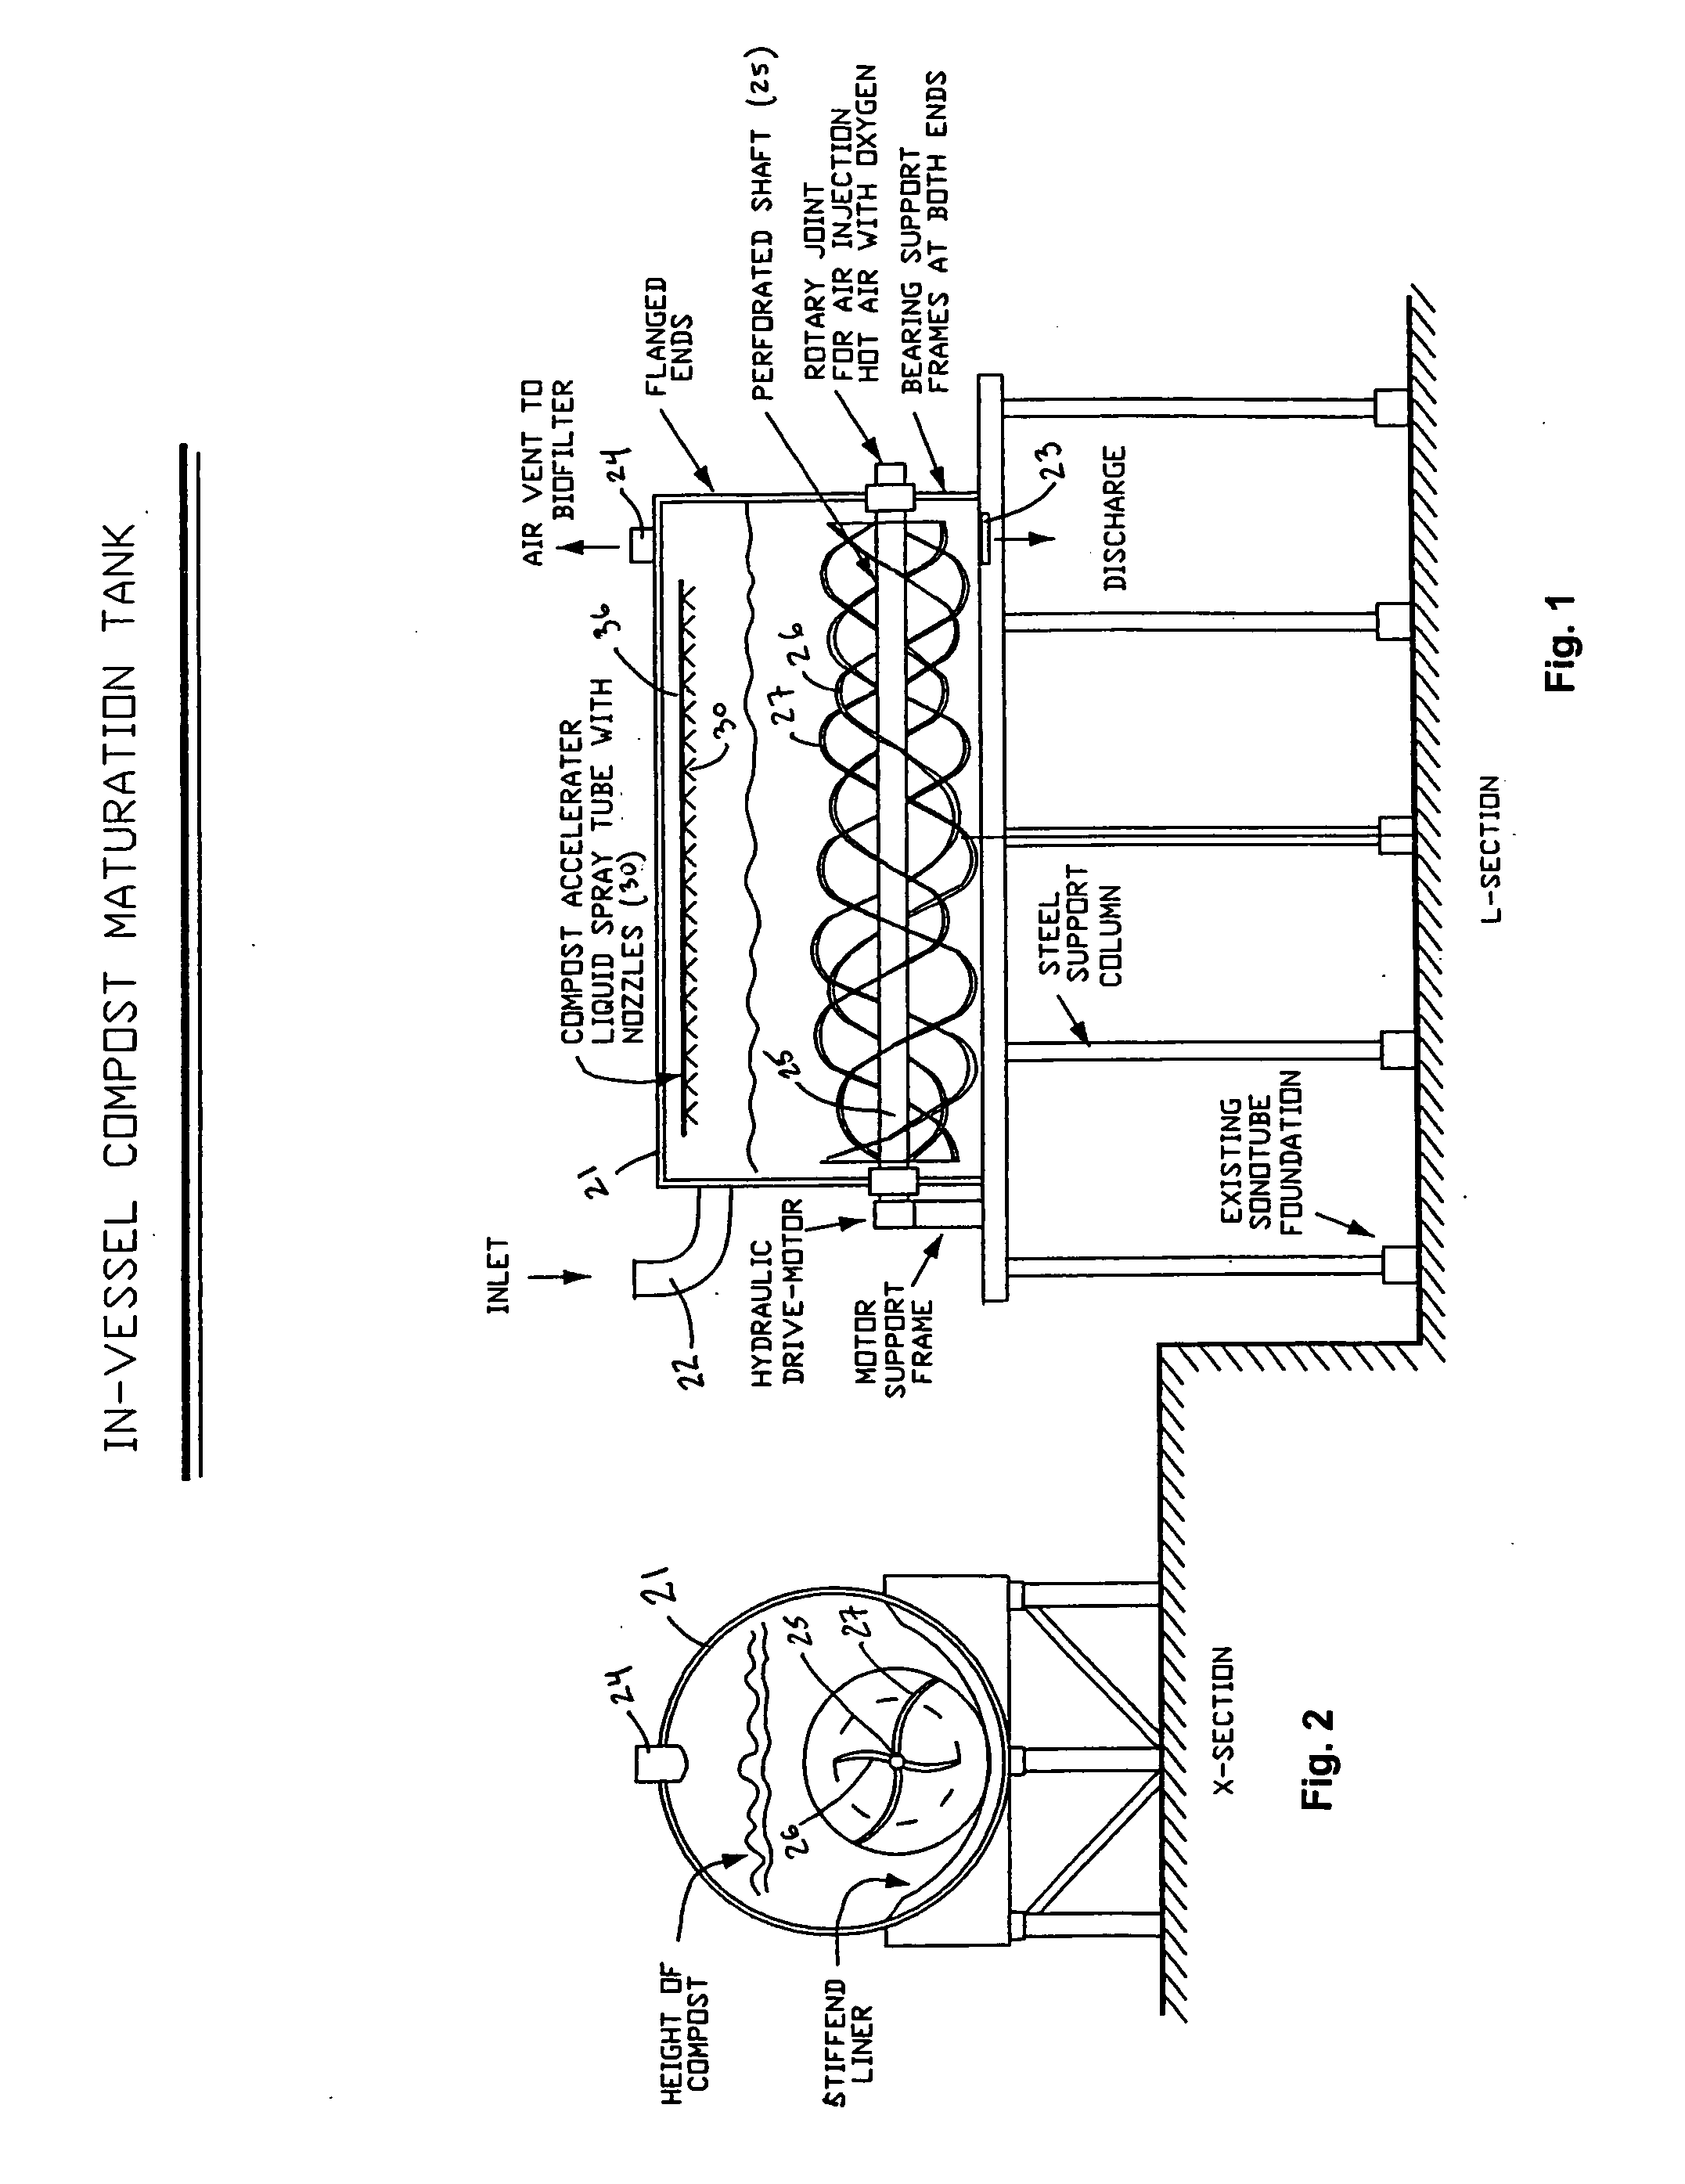 Apparatus and methods for generating compost